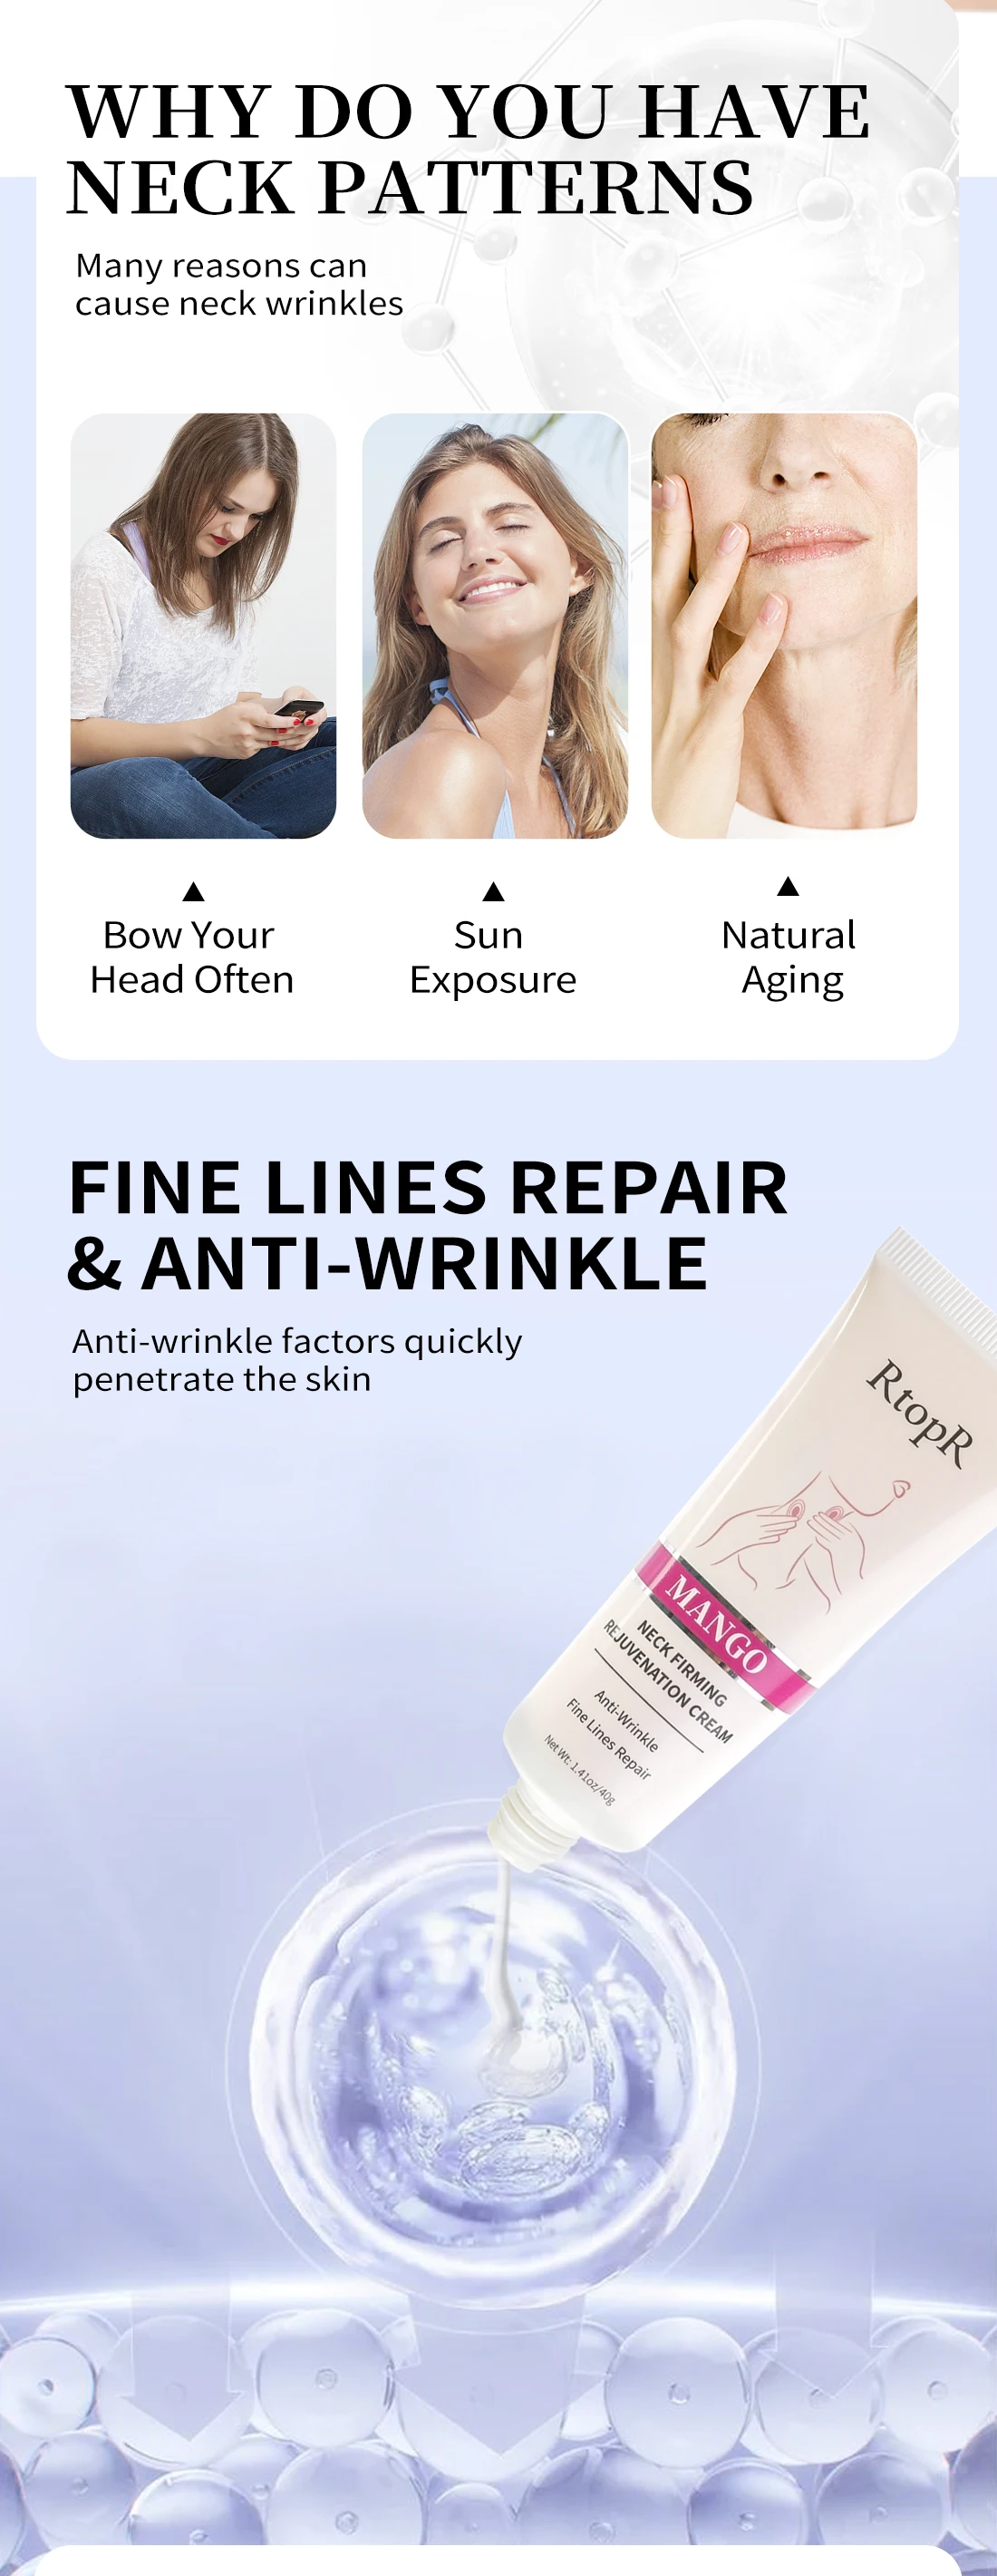 RtopR Neck Firming Wrinkle Remover Cream Rejuvenation Firming Skin Whitening Moisturizing Shape Beauty Neck Skin Care Products